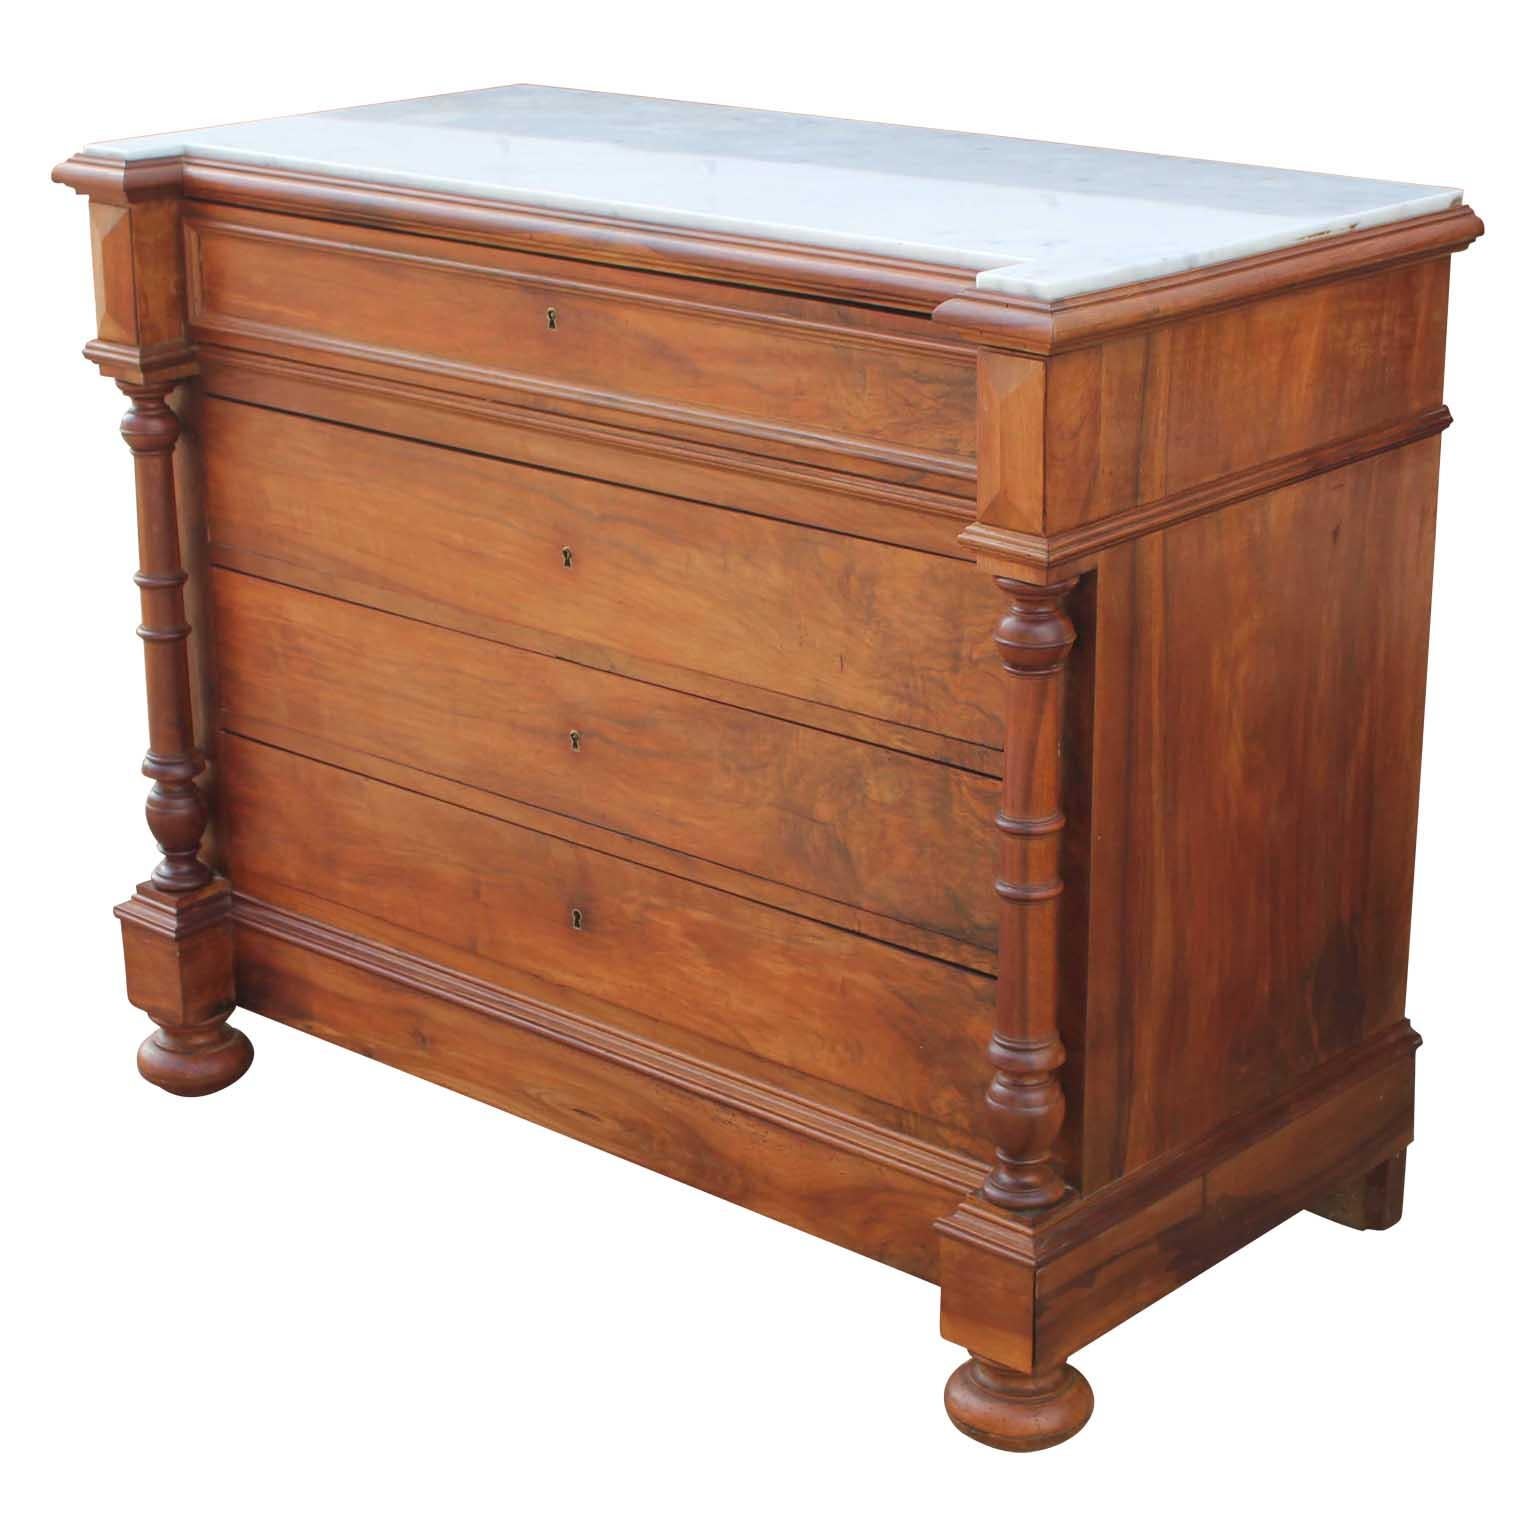 Victorian French Revival walnut four drawer chest of drawers with a lovely white marble top.